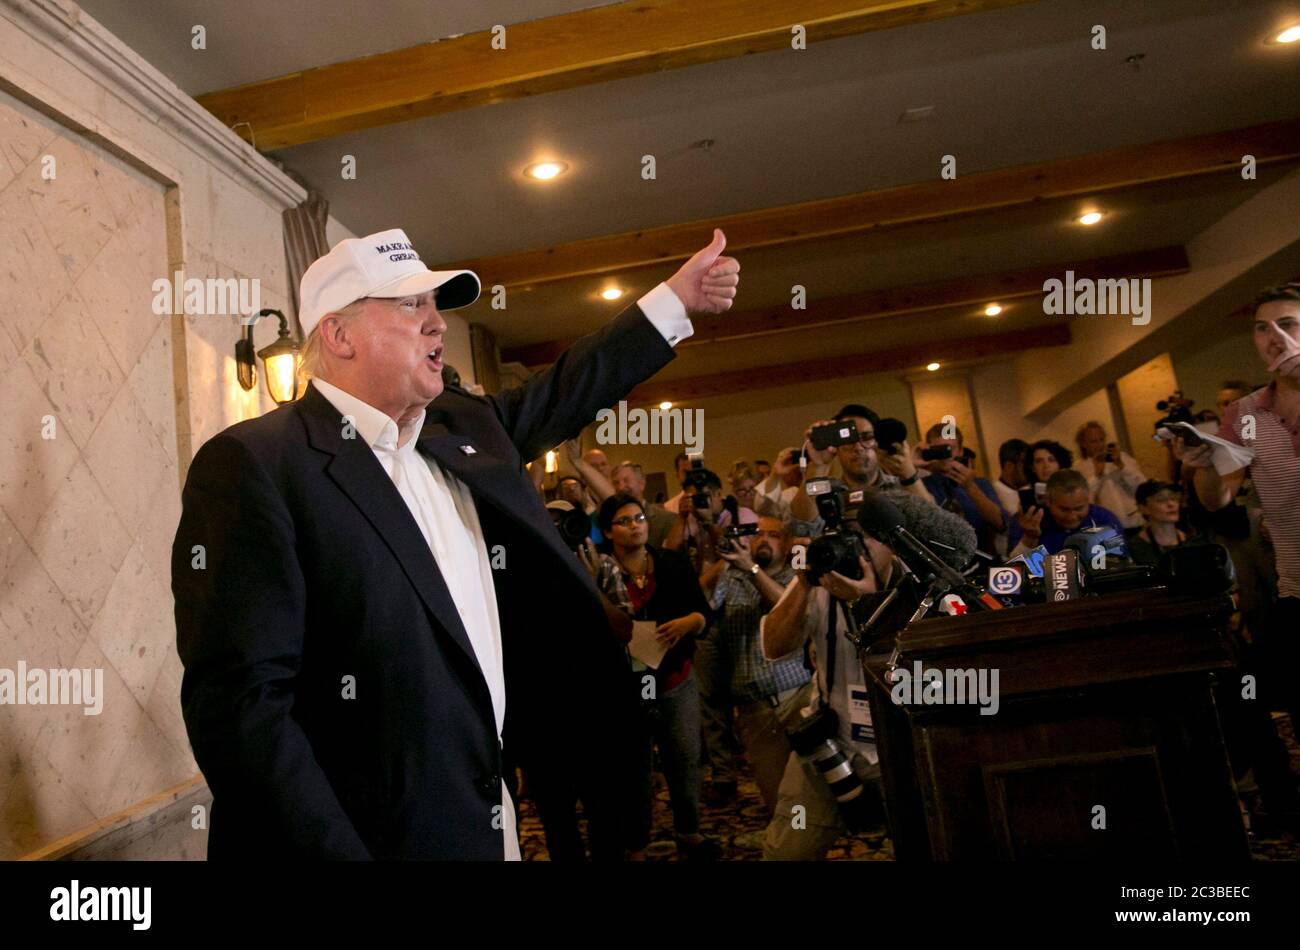 Laredo Texas USA, July 23 2015: Donald Trump, a businessman turned politician who is running for the Republican nomination for U.S. president, speaks to the media at the Paseo Real Reception Hall.  ©Marjorie Kamys Cotera/Daemmrich Photography Stock Photo